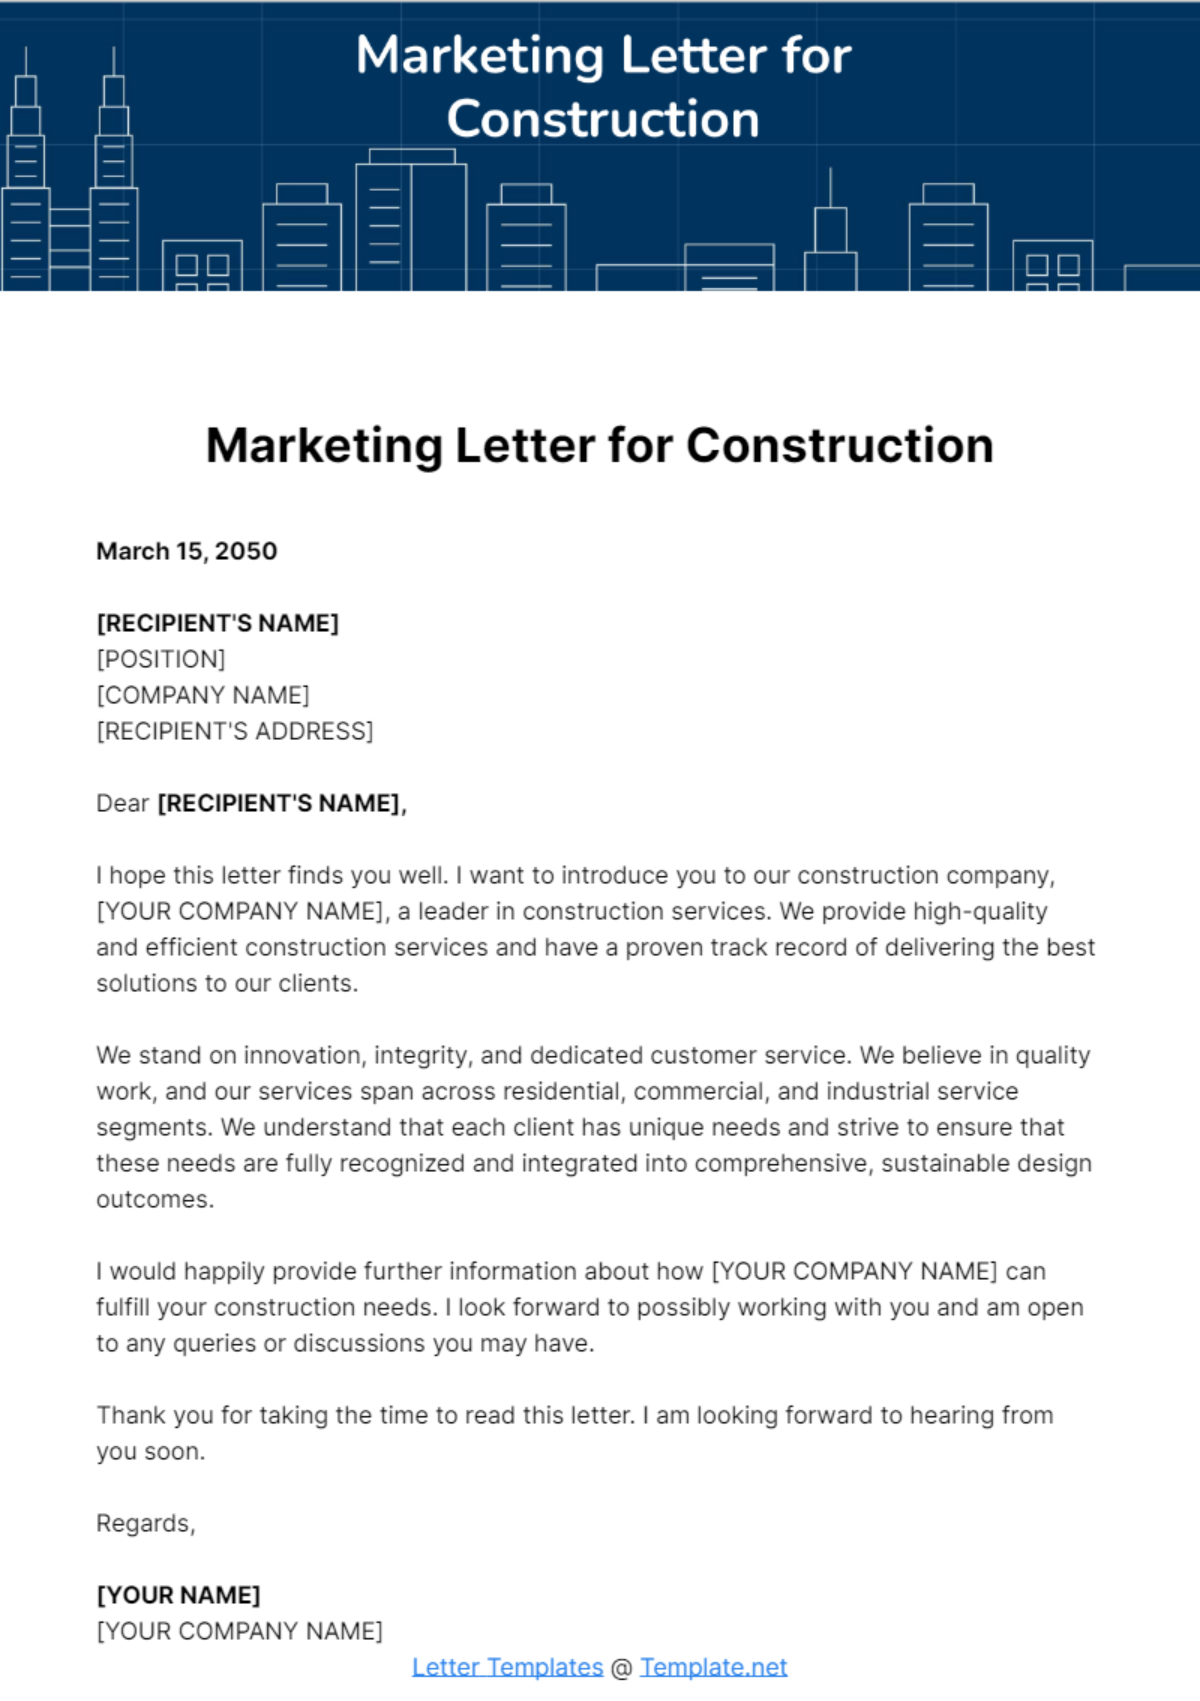 Free Marketing Letter for Construction Template